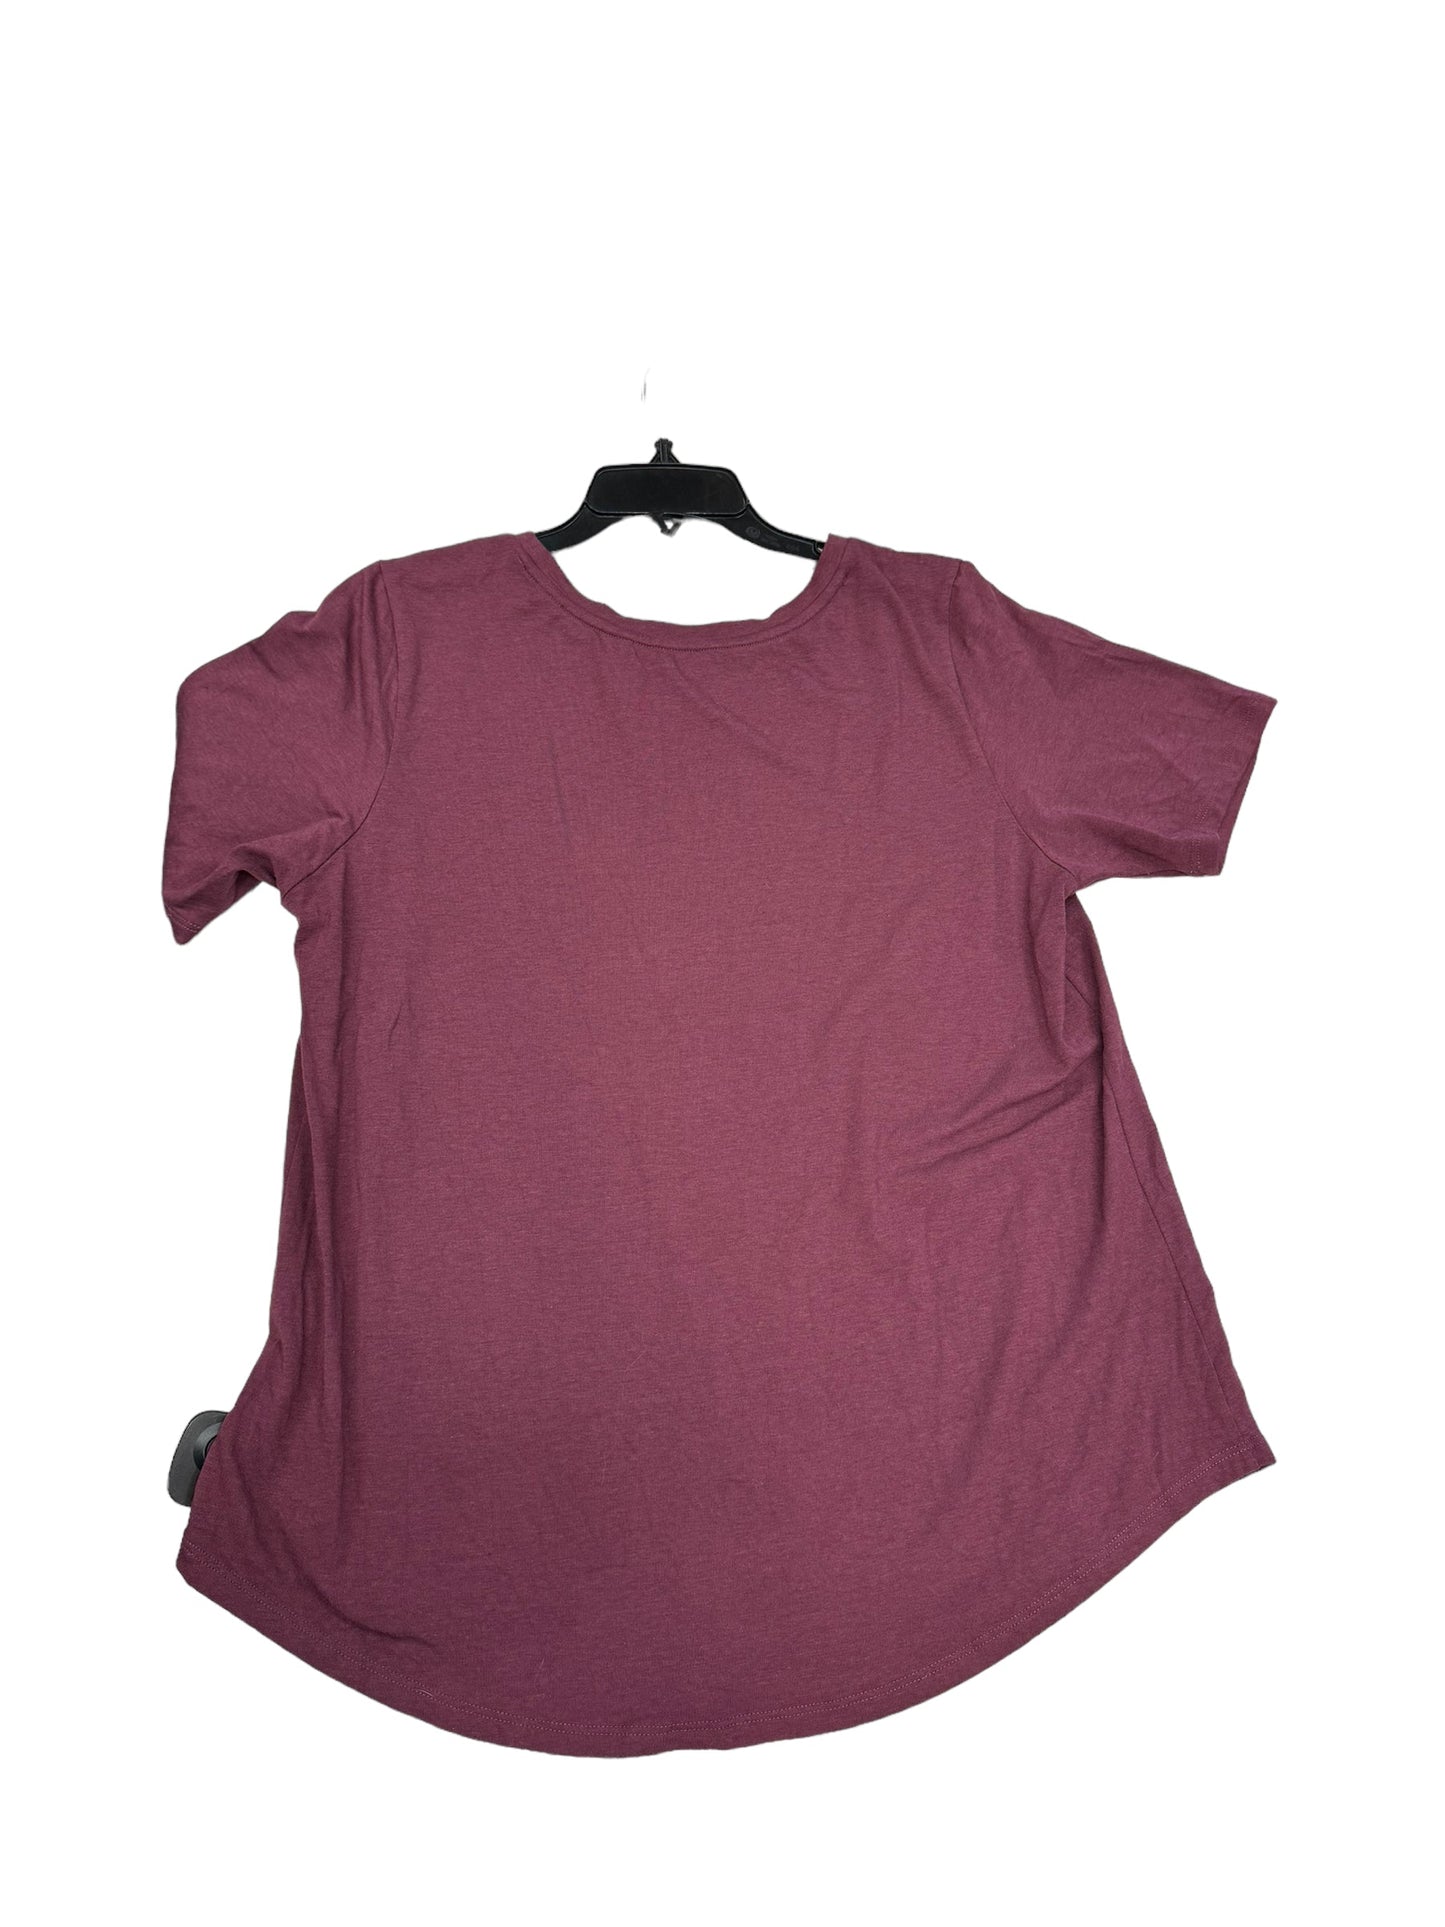 Top Short Sleeve By Cmc  Size: L